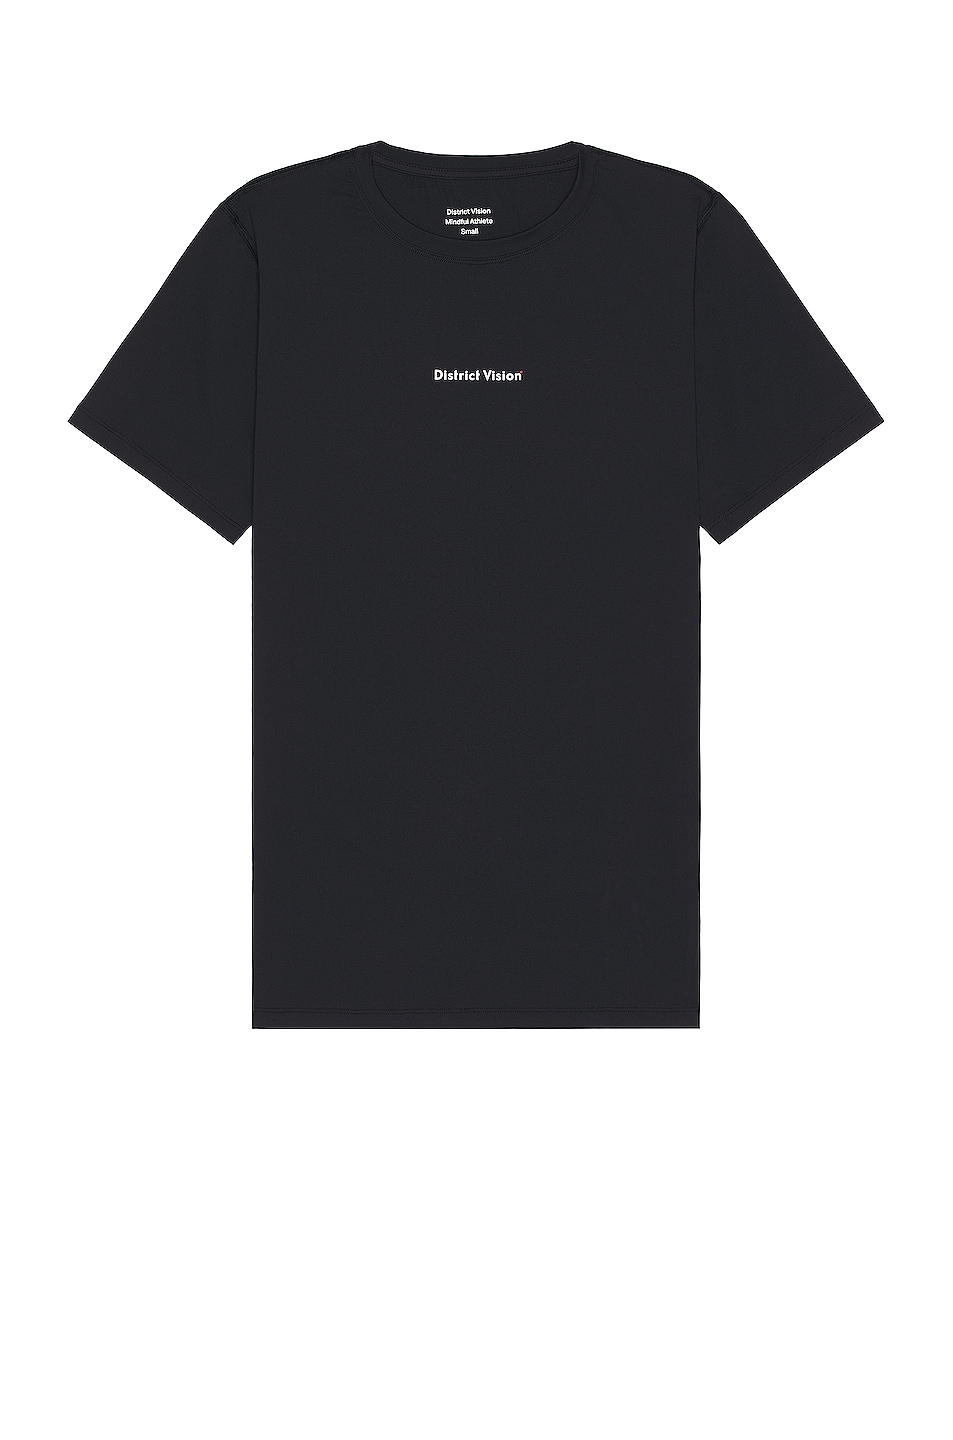 Image 1 of District Vision Aloe T-shirt in Black